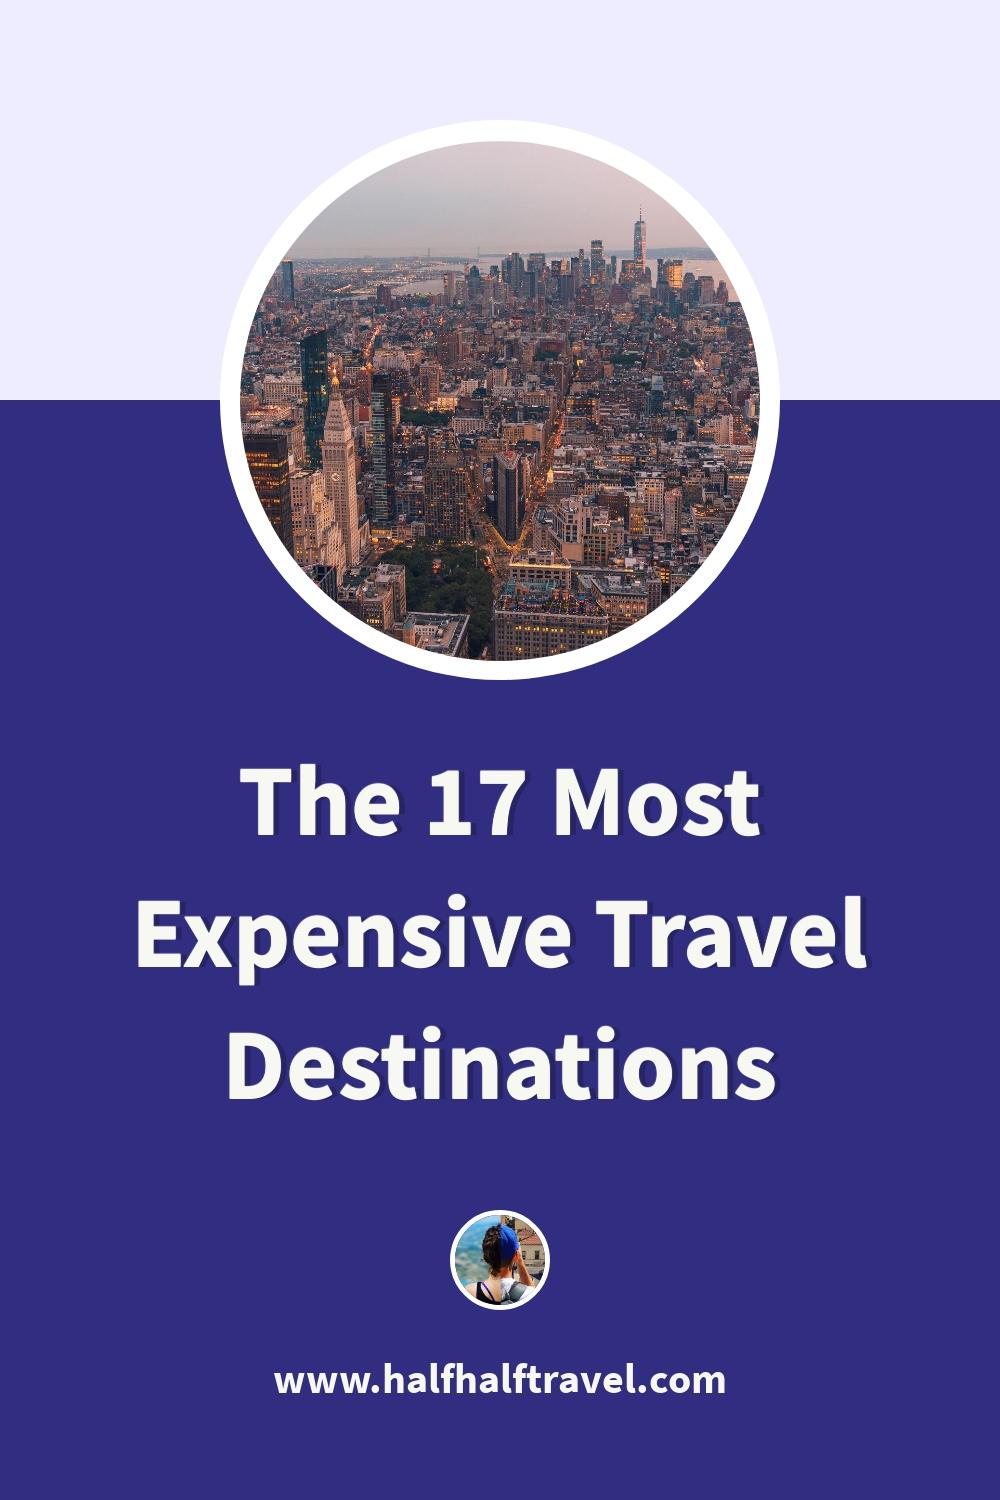 Pinterest image from the 'The 17 Most Expensive Travel Destinations (Are They Worth It?)' article on Half Half Travel